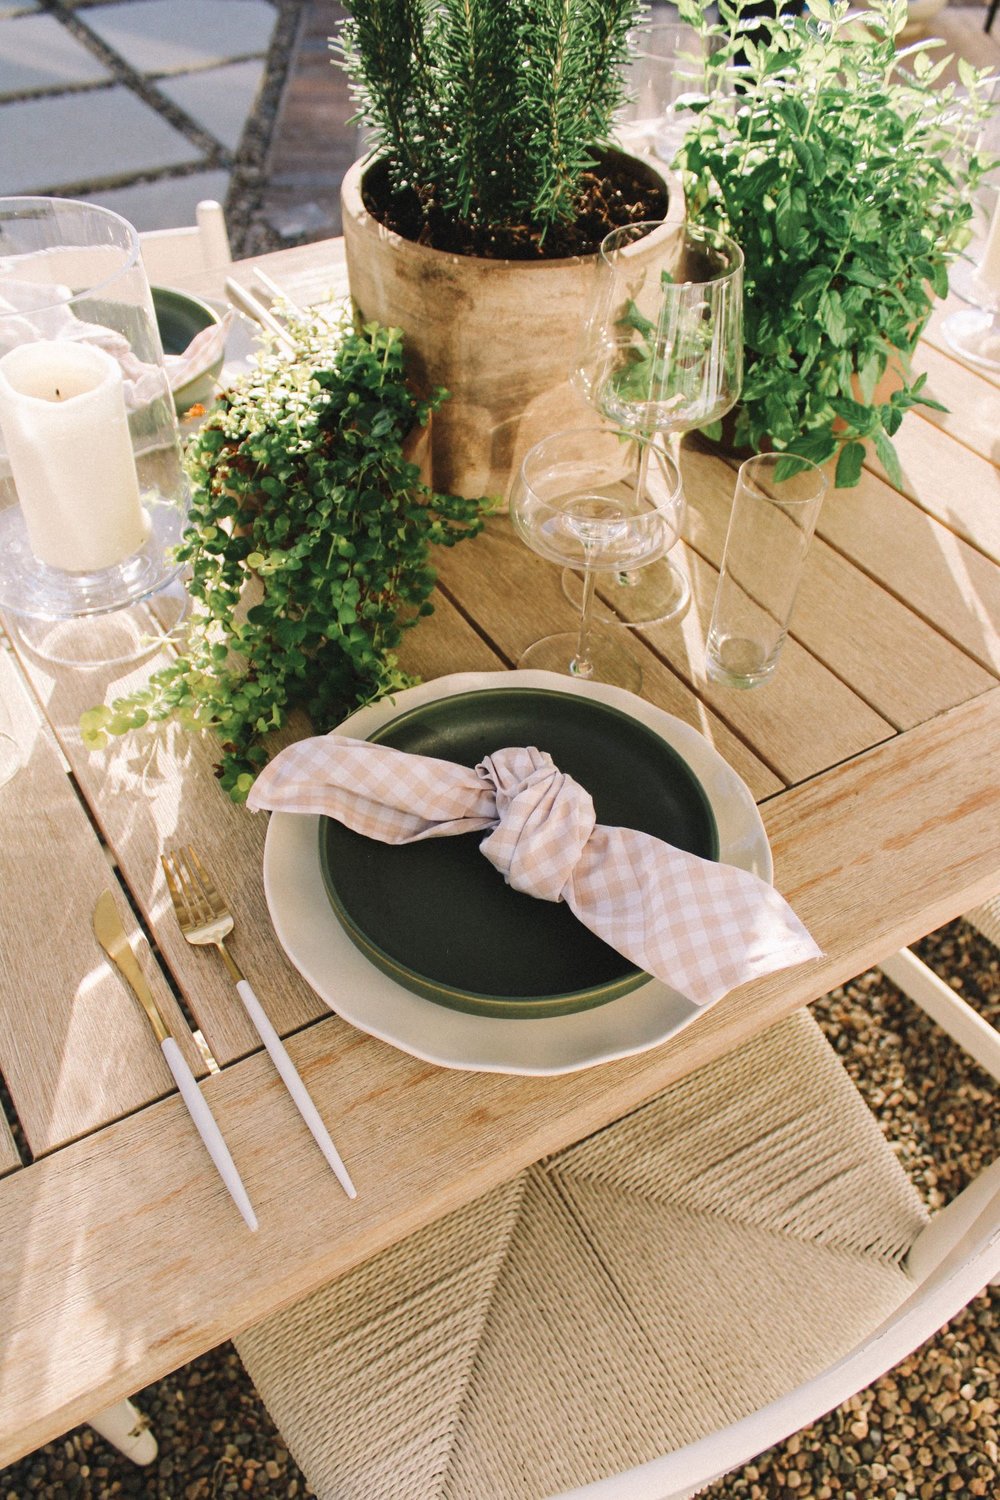 Simple+setting+idea+-+gingham+napkin+and+a+small+pop+of+color+with+your+salad+plate+•+Lauren+Saylor+__+A+Fabulous+Fete.jpg